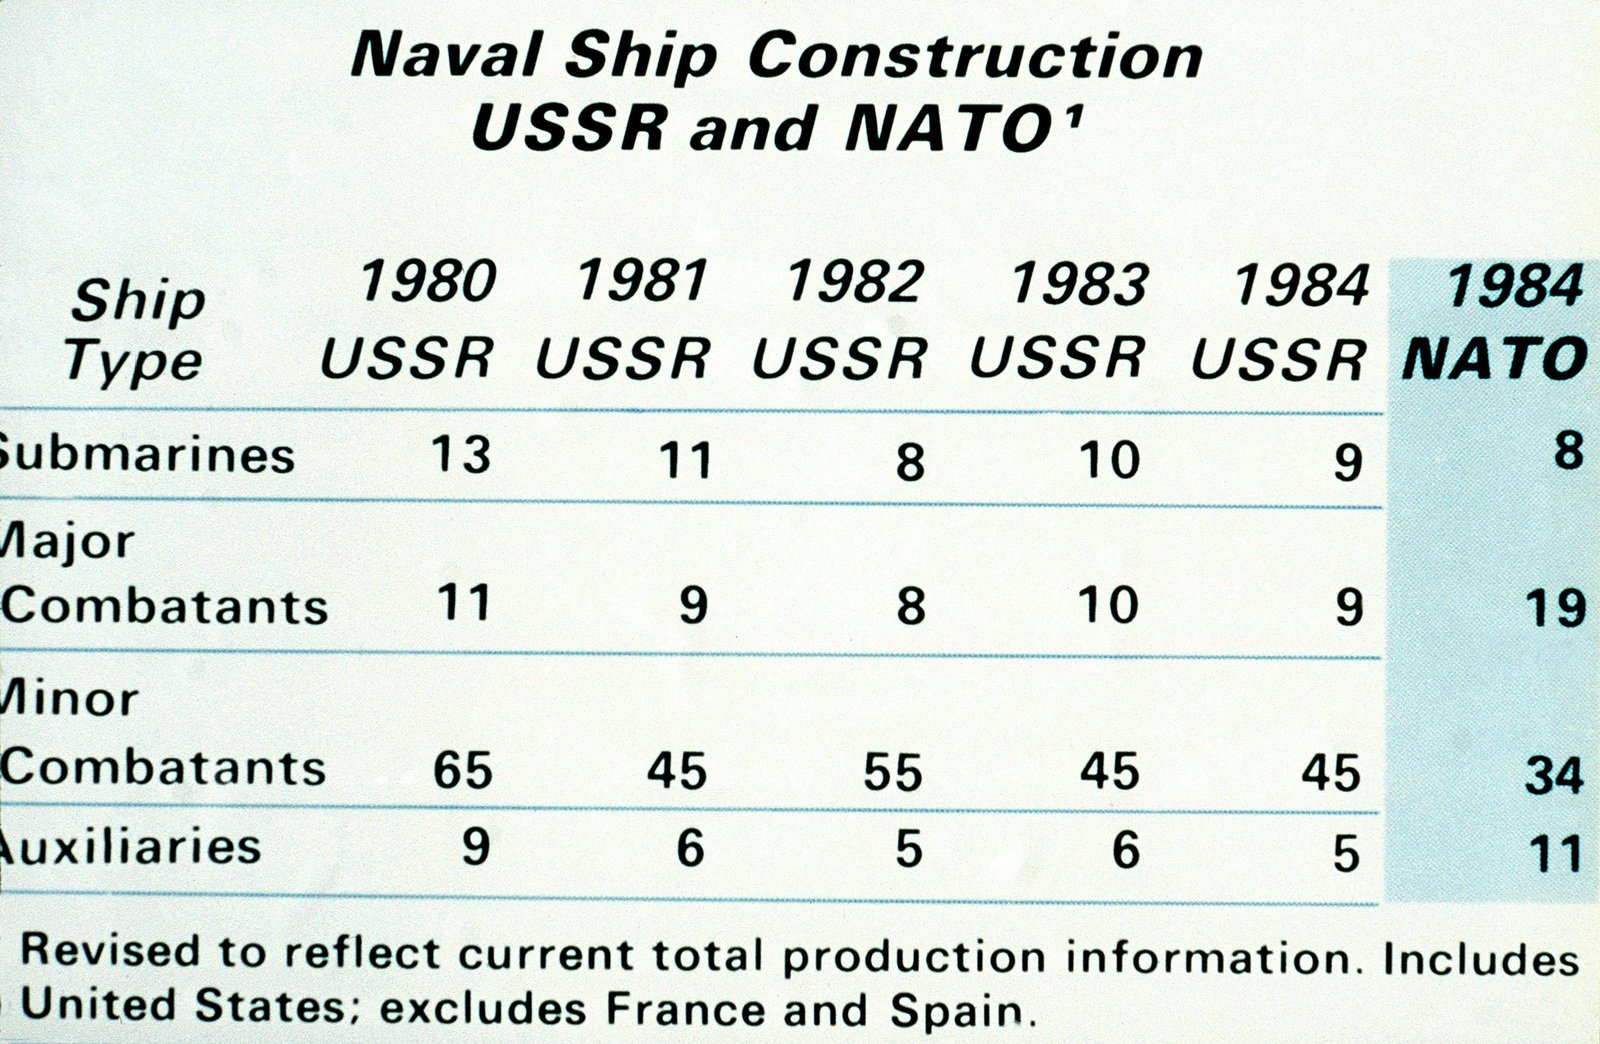 1984 Military Pay Chart